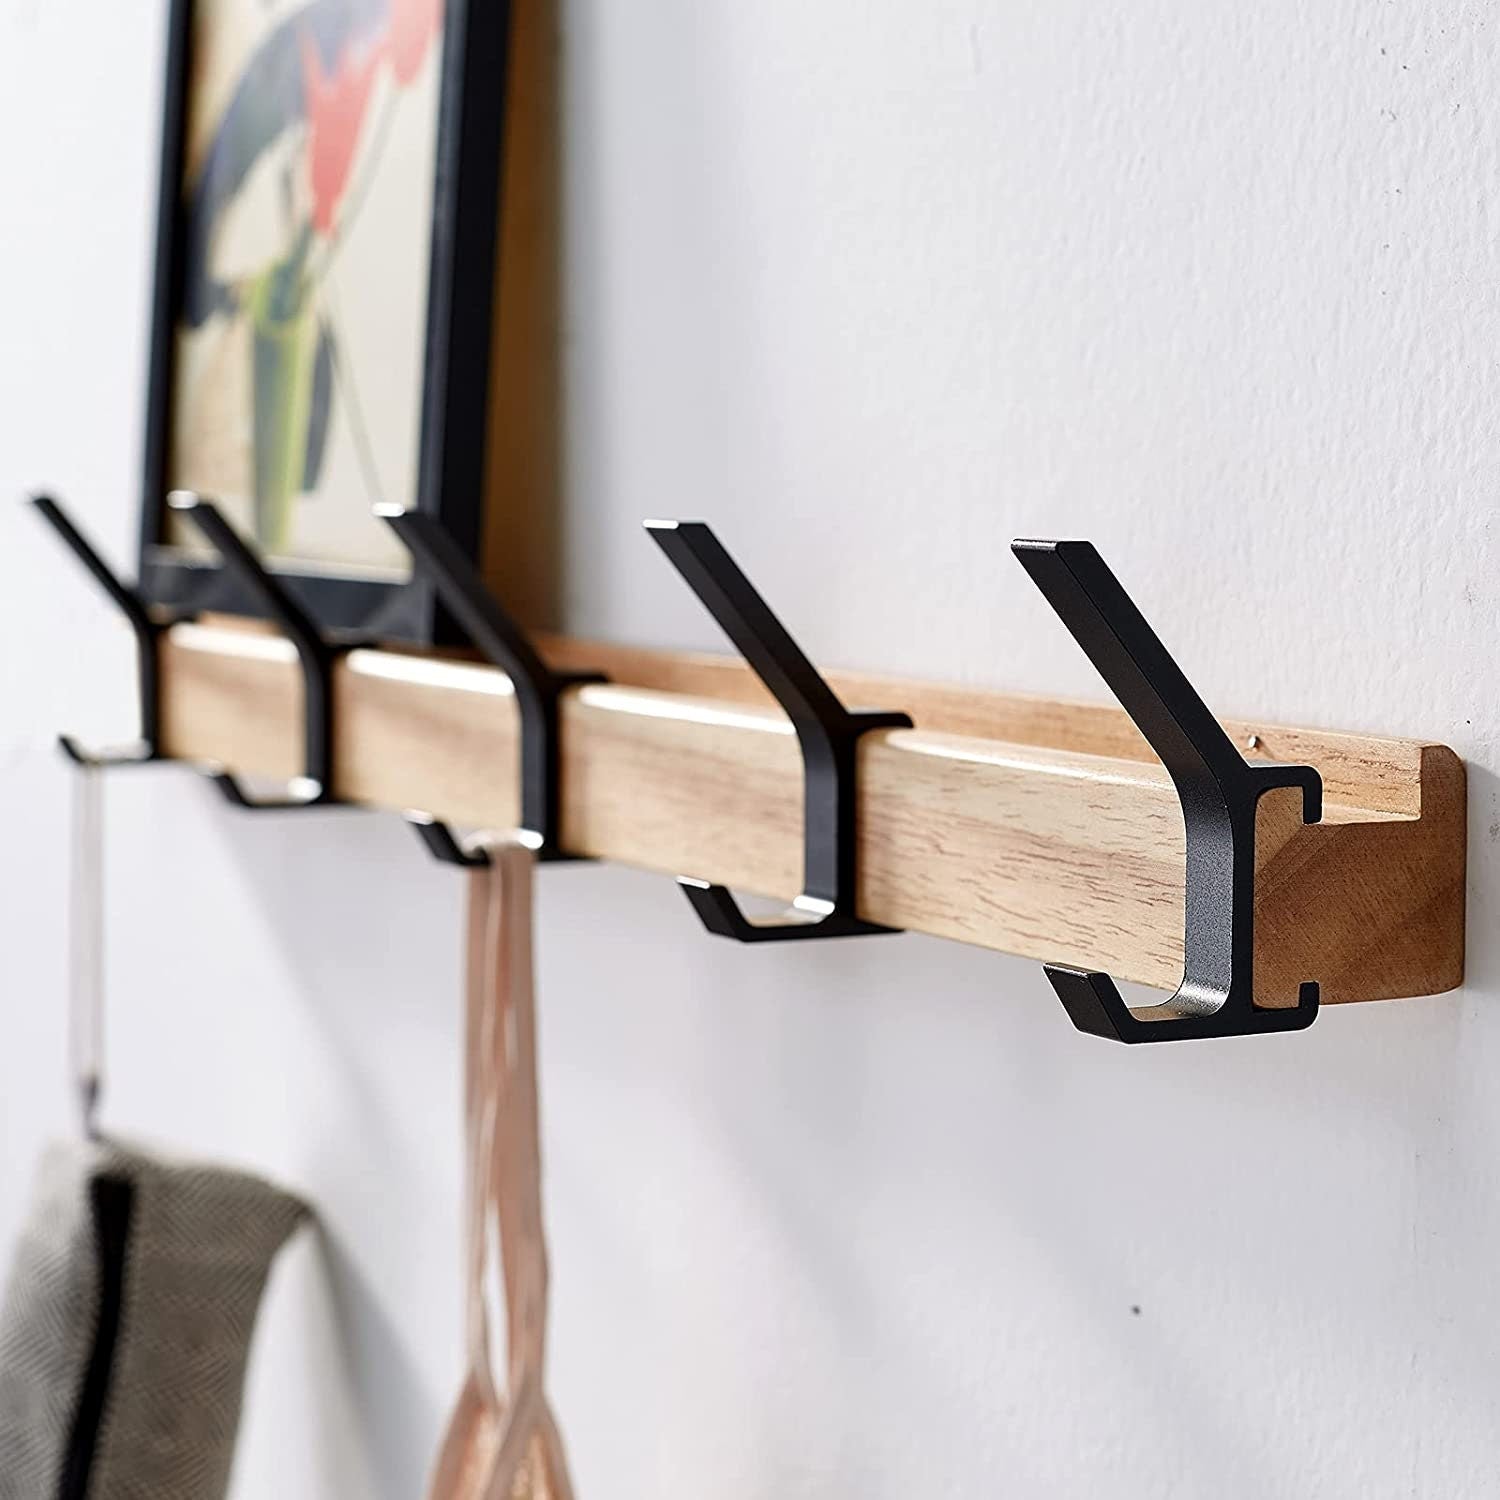 Coat Rack Wall Mount With Wall Hooks, Black Coat Hangers For Wall